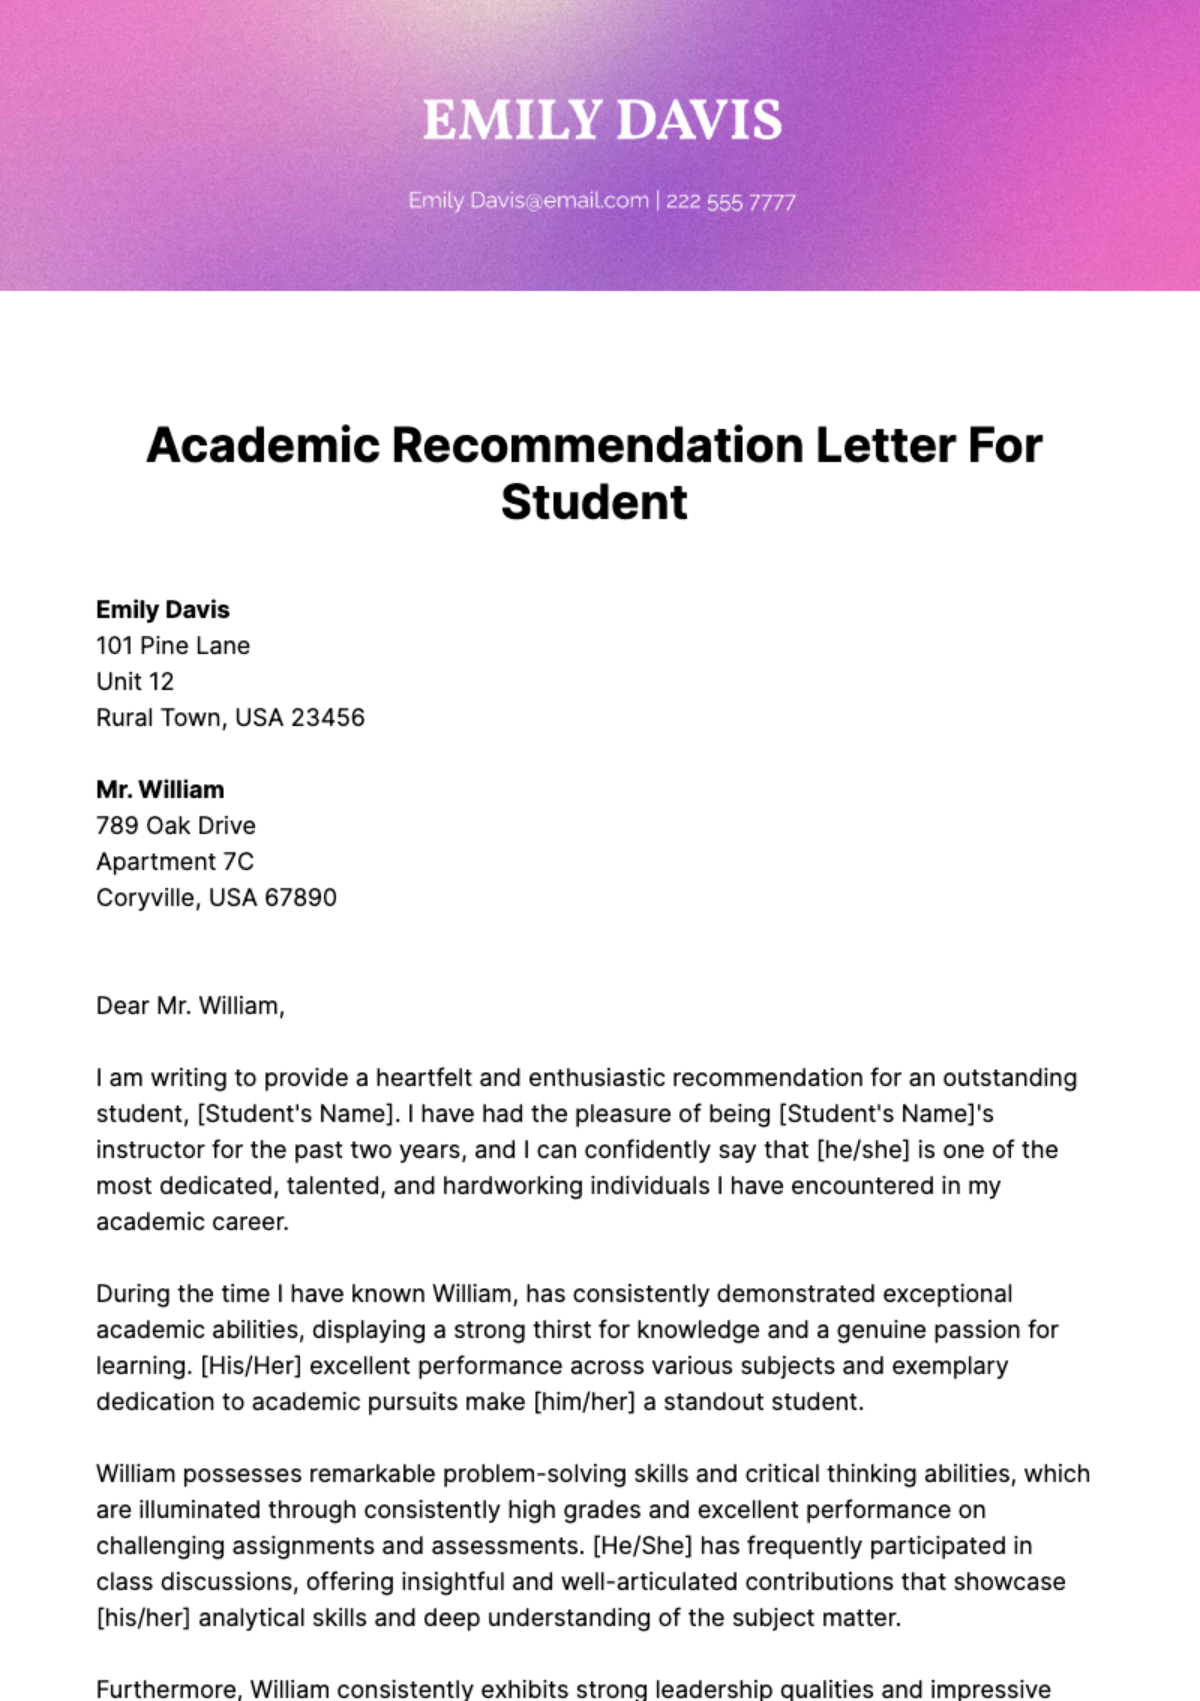 Academic Recommendation Letter For Student Template